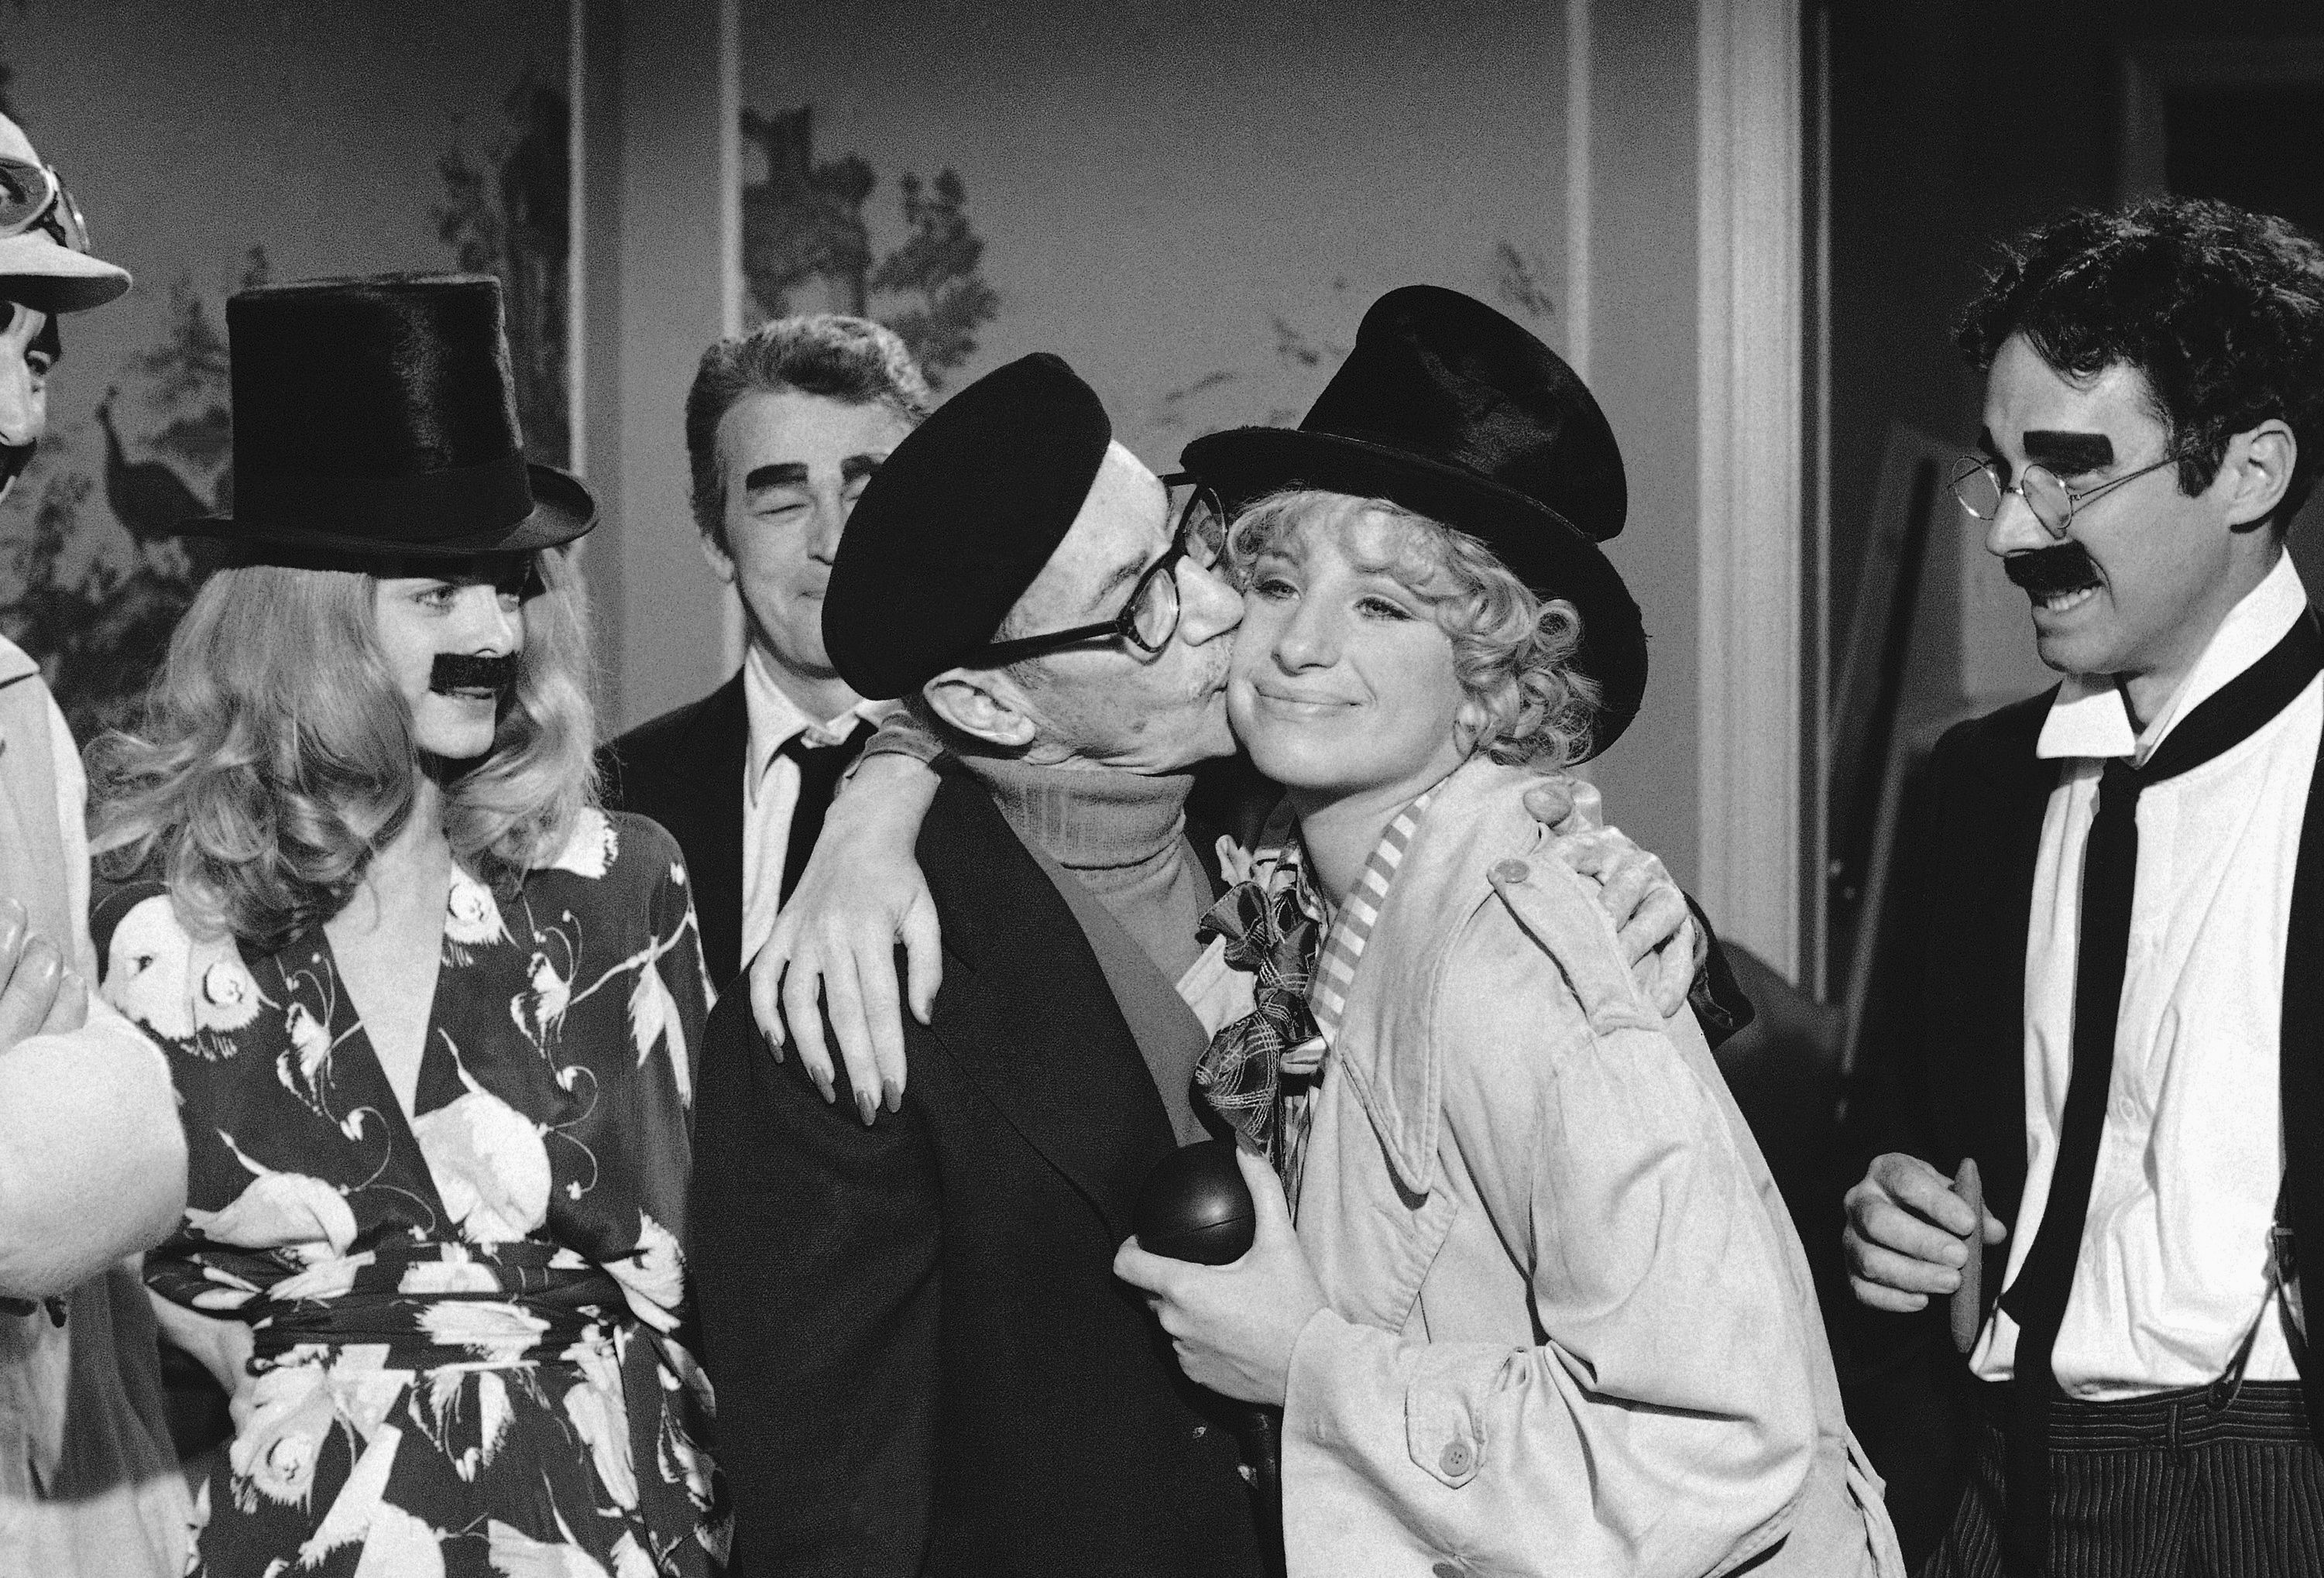 Groucho Marx Has A Kiss For Barbra Streisand As He Visits The Set